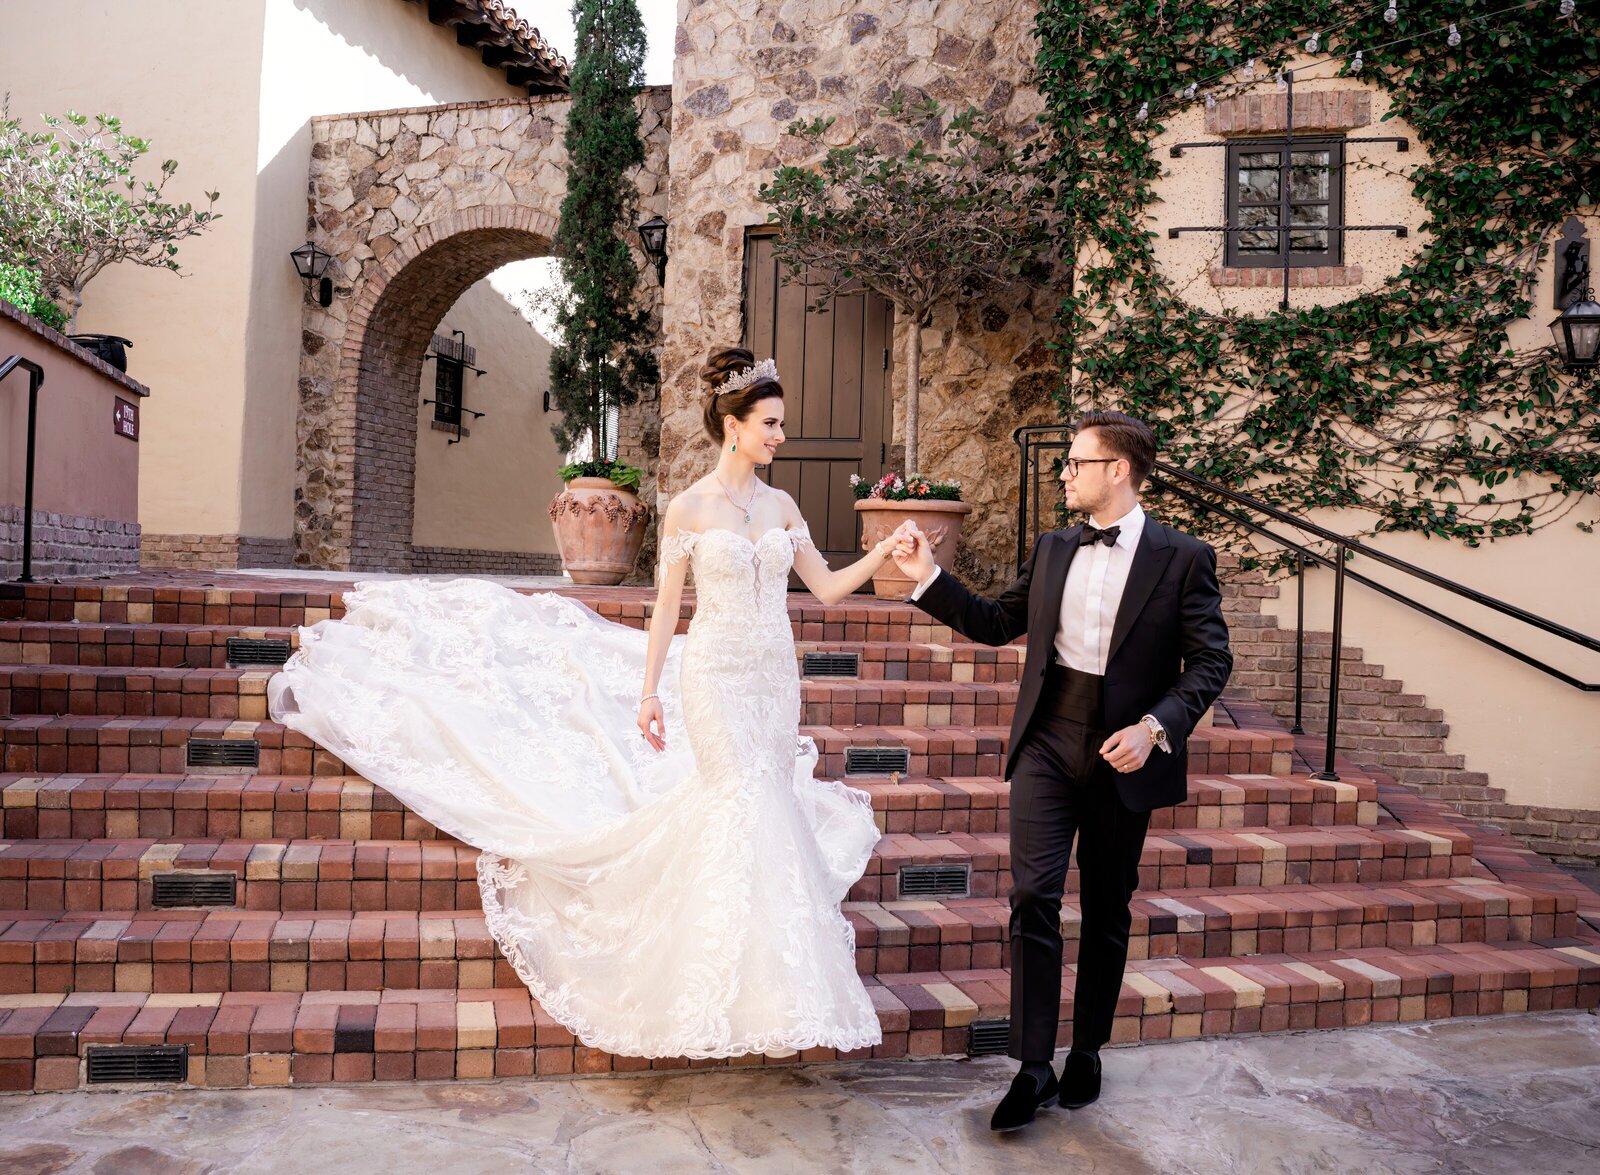 Experience the romance of Bella Collina through our exquisite wedding photography. With its Tuscan-inspired beauty as your backdrop, every moment becomes a timeless work of art.